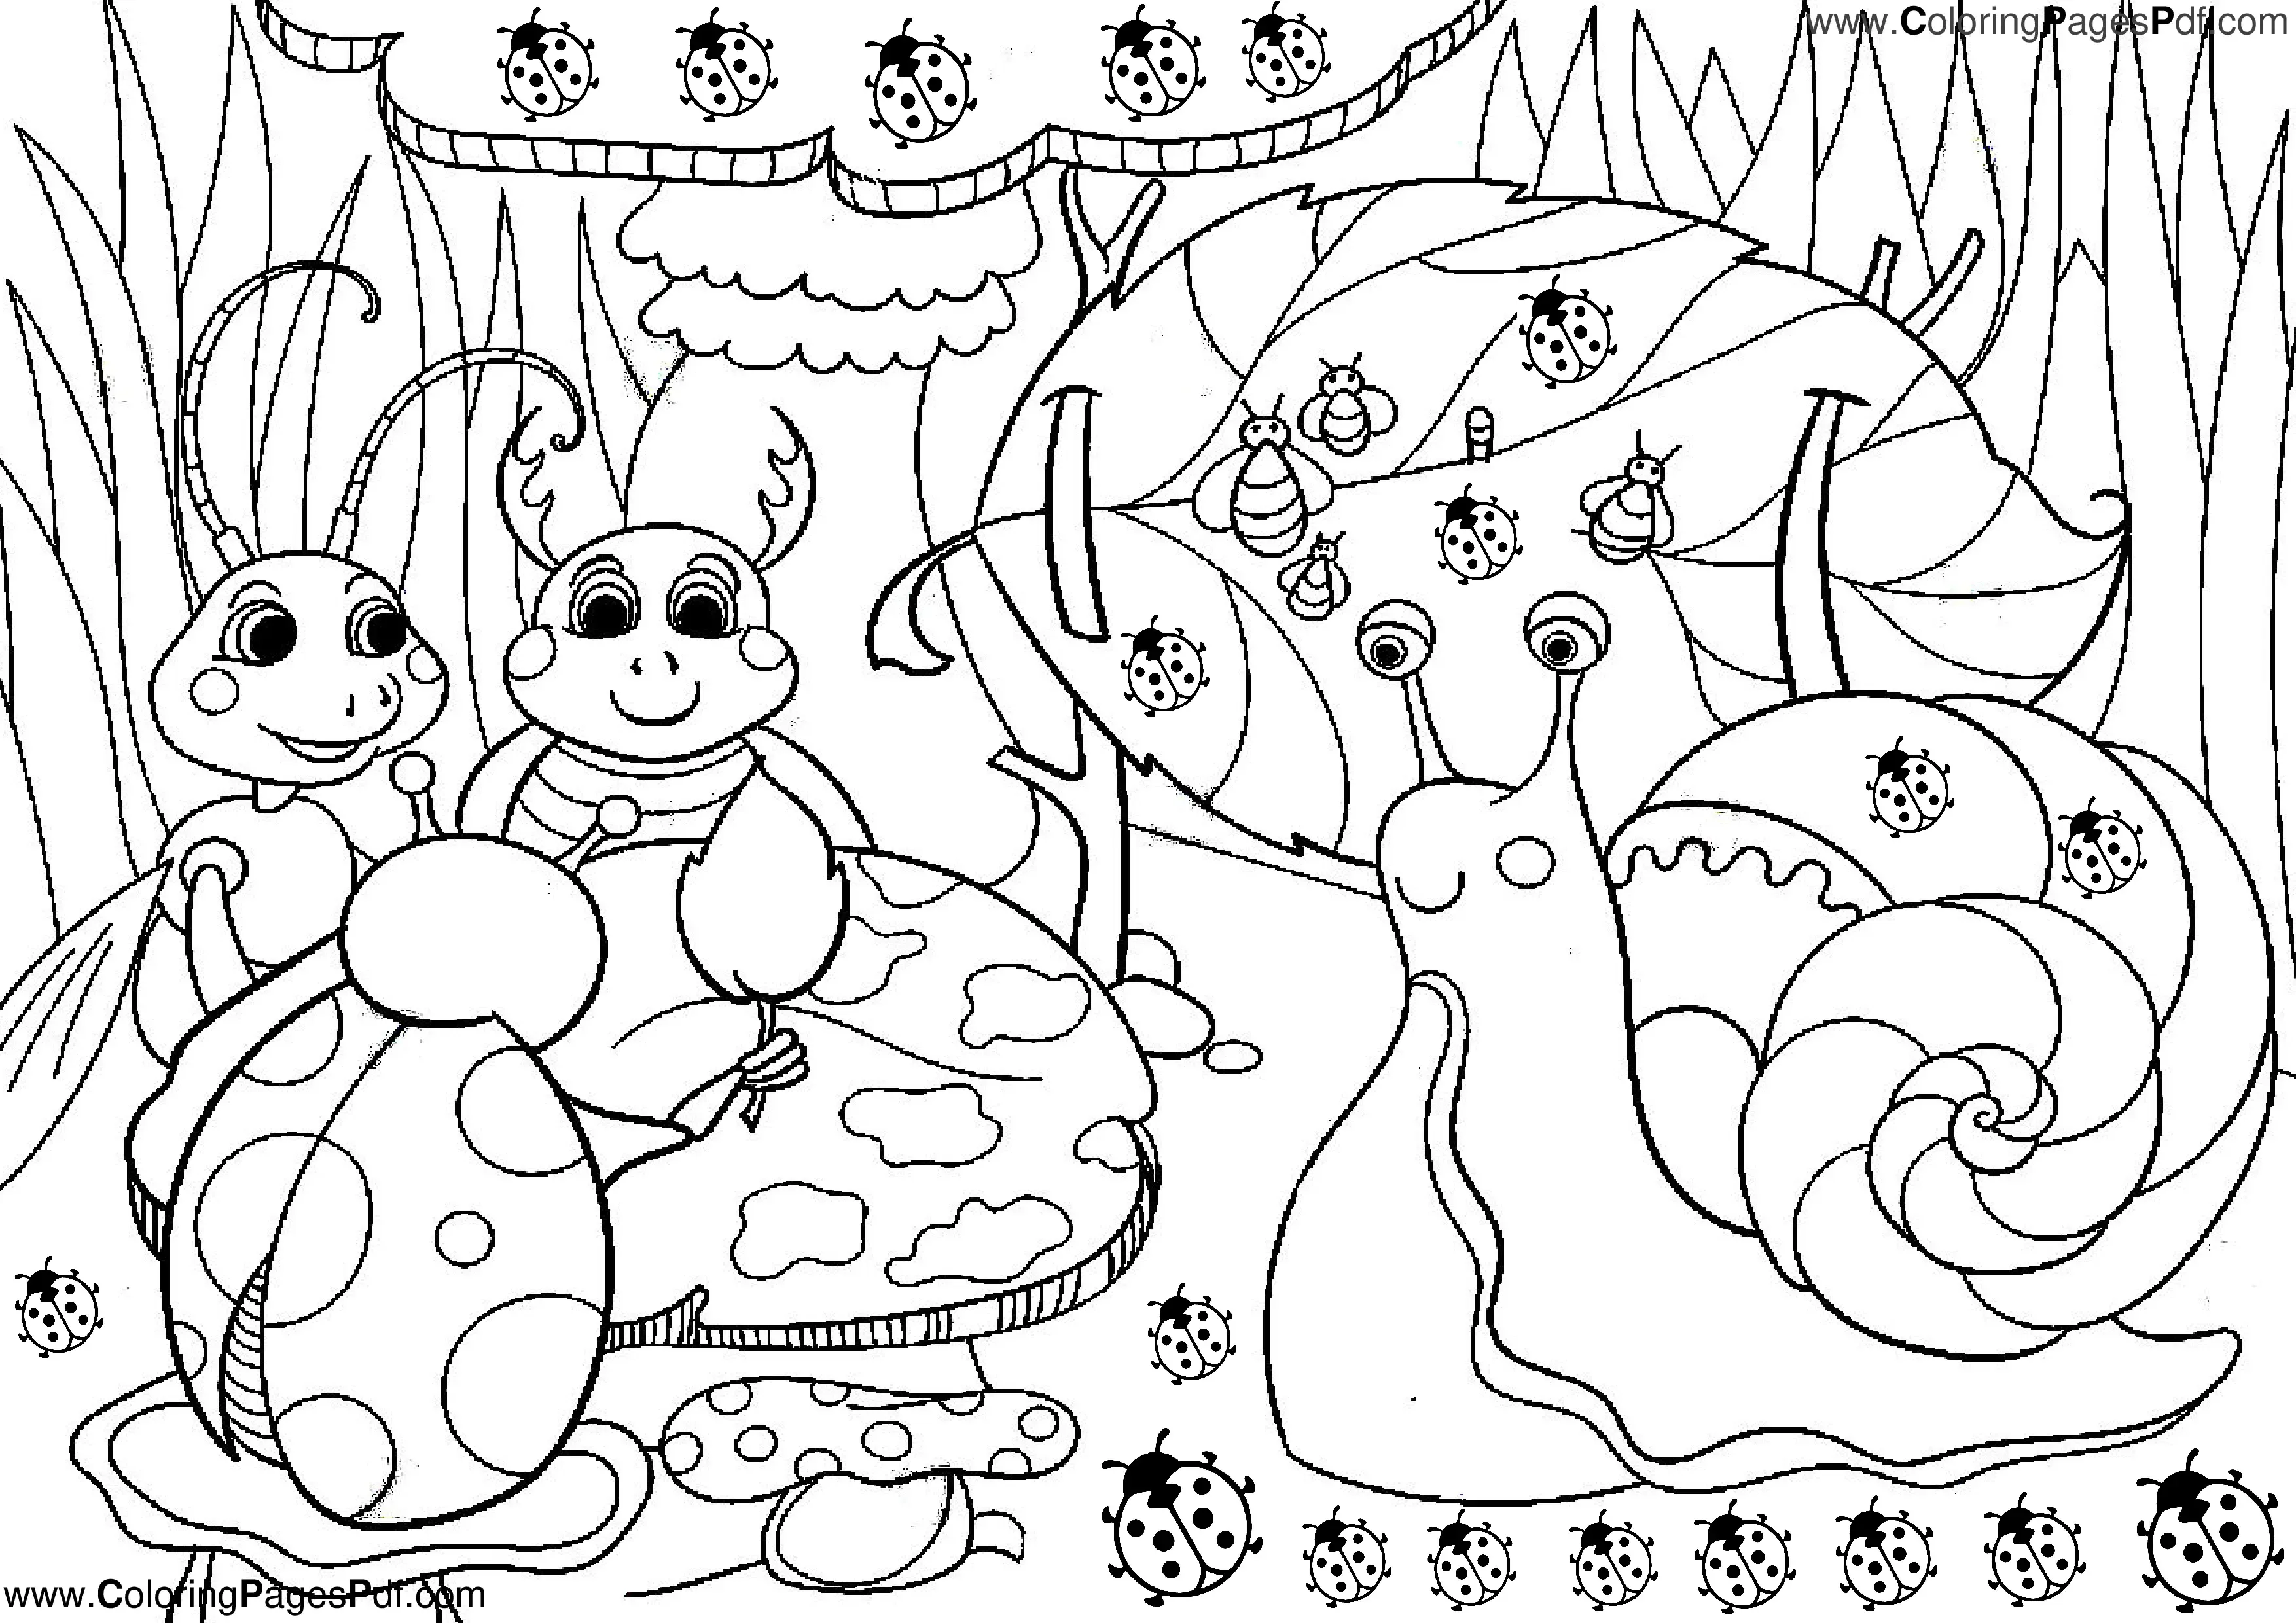 Grouchy ladybug coloring page